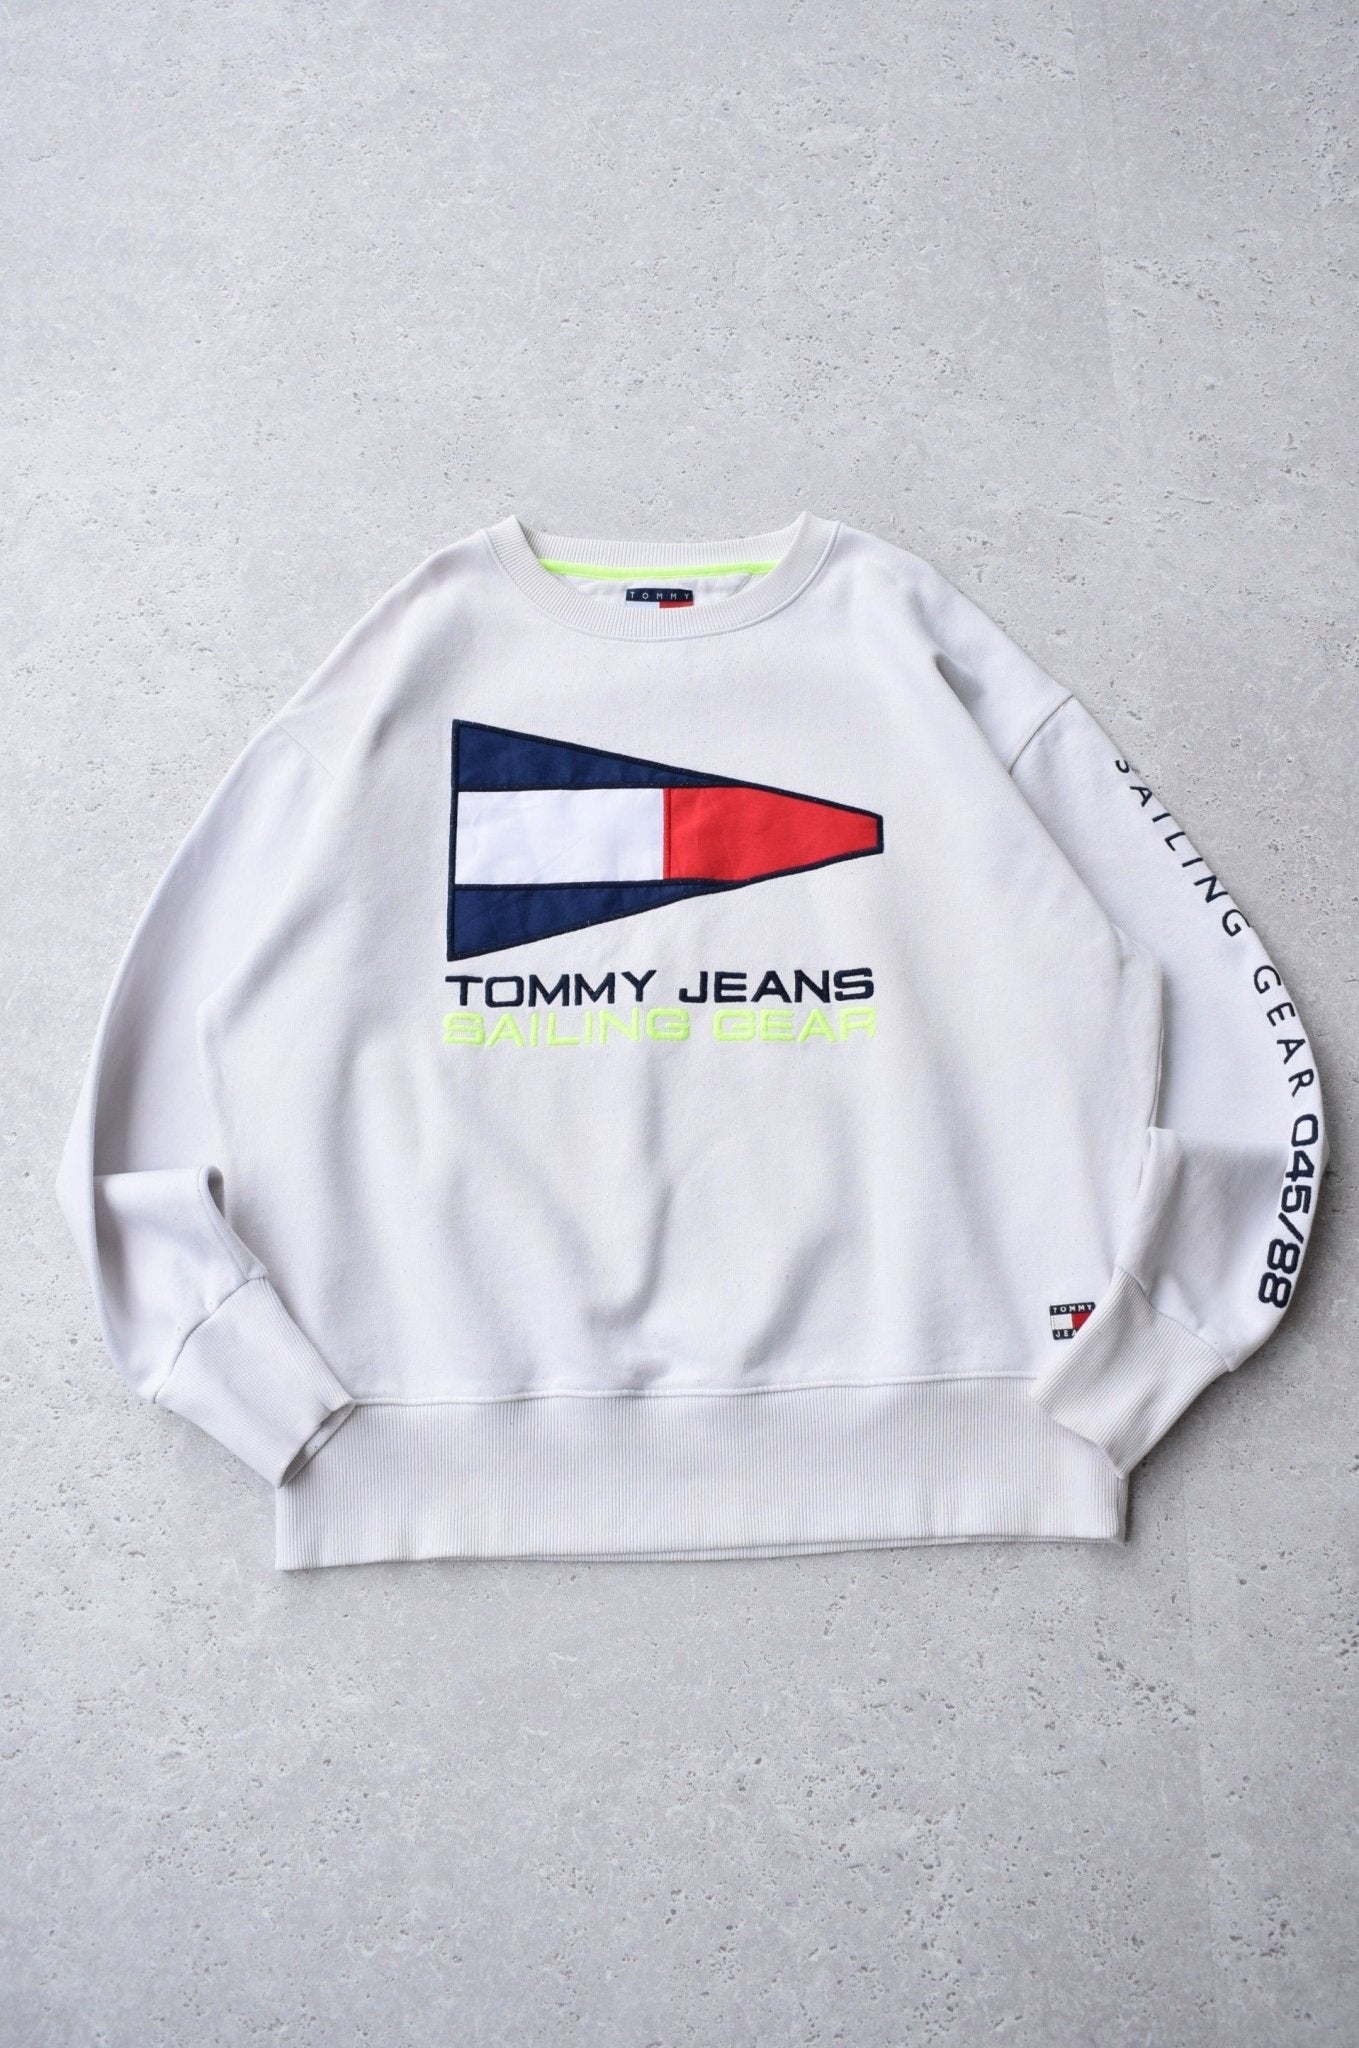 Vintage Tommy Hilfiger Sailing Gear Embroidered Spellout Sweater (XL) - Retrospective Store